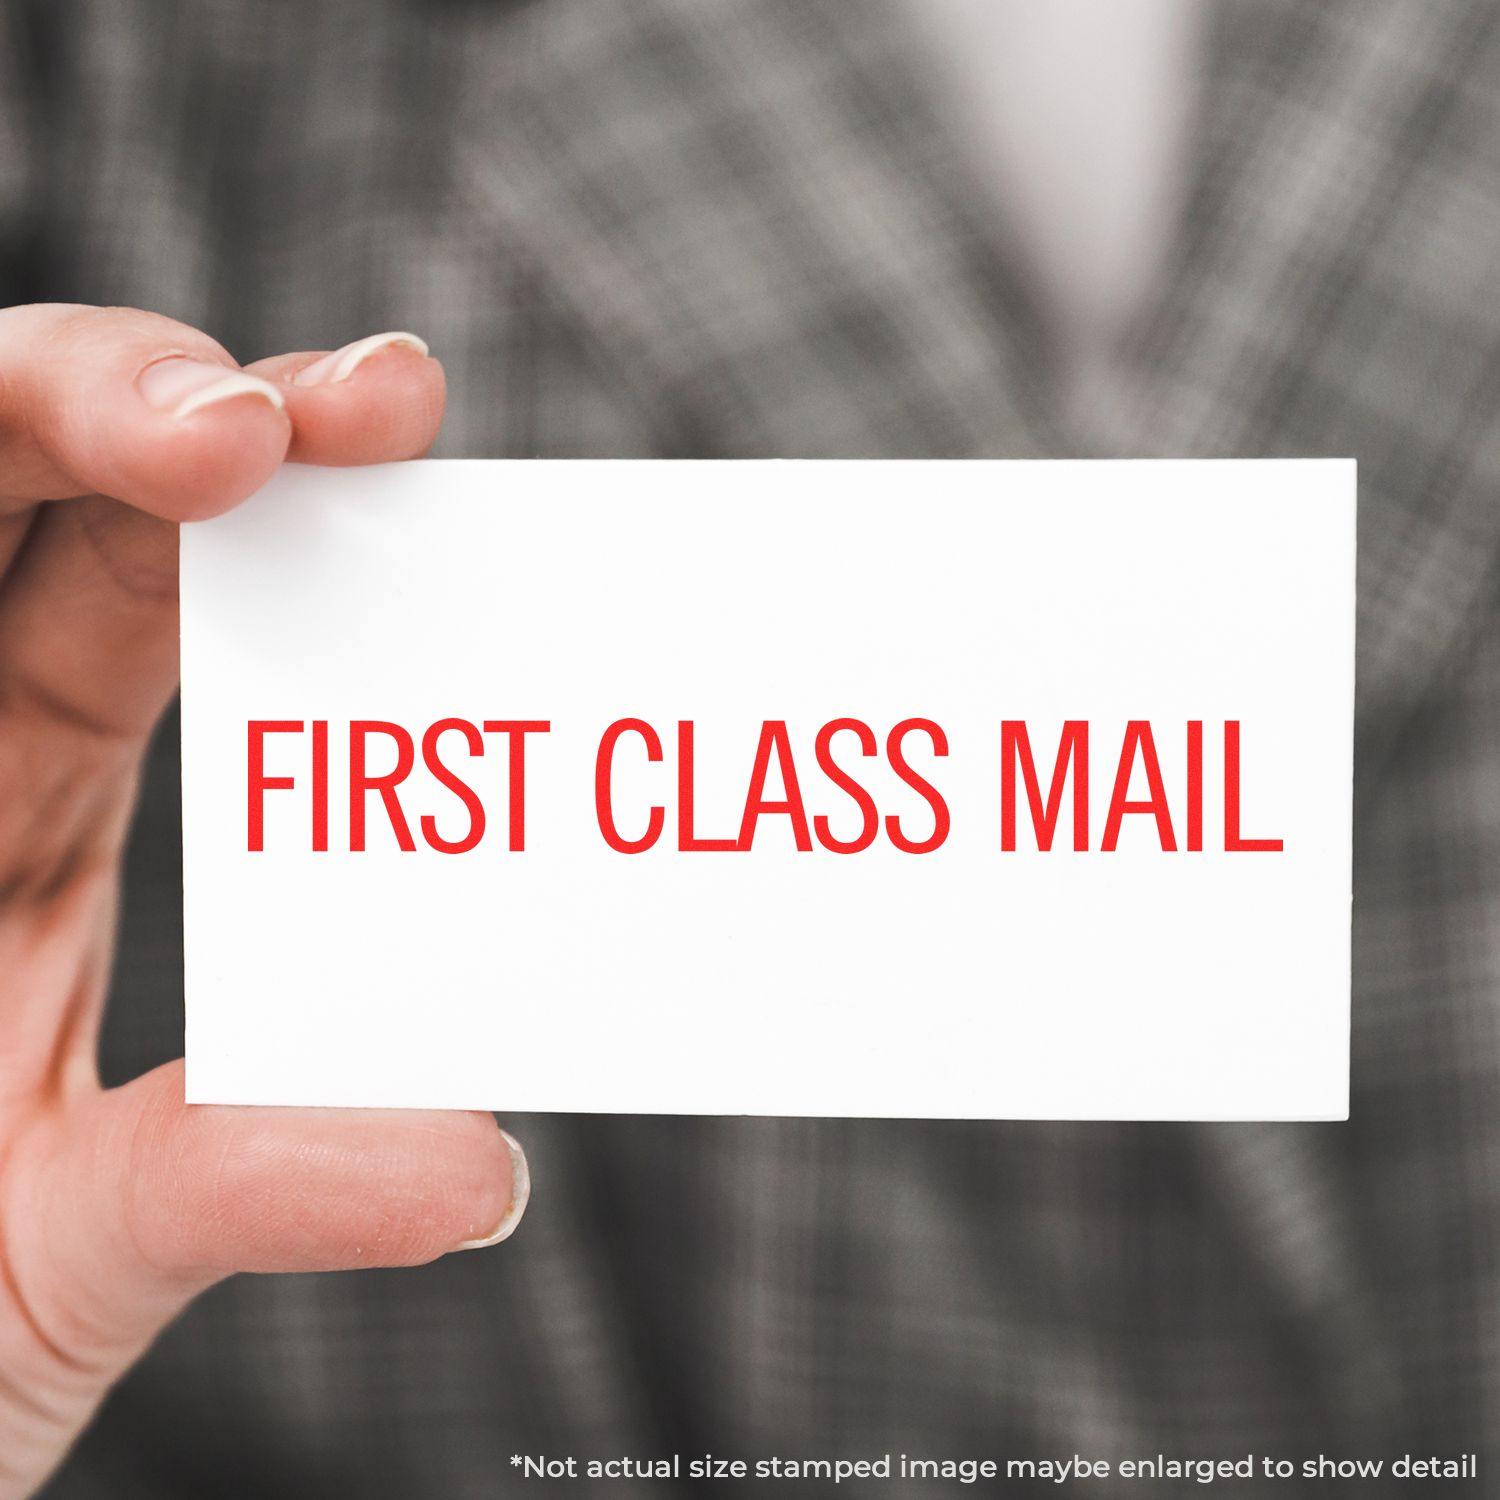 A stock office rubber stamp with a stamped image showing how the text "FIRST CLASS MAIL" in a large narrow font is displayed after stamping.